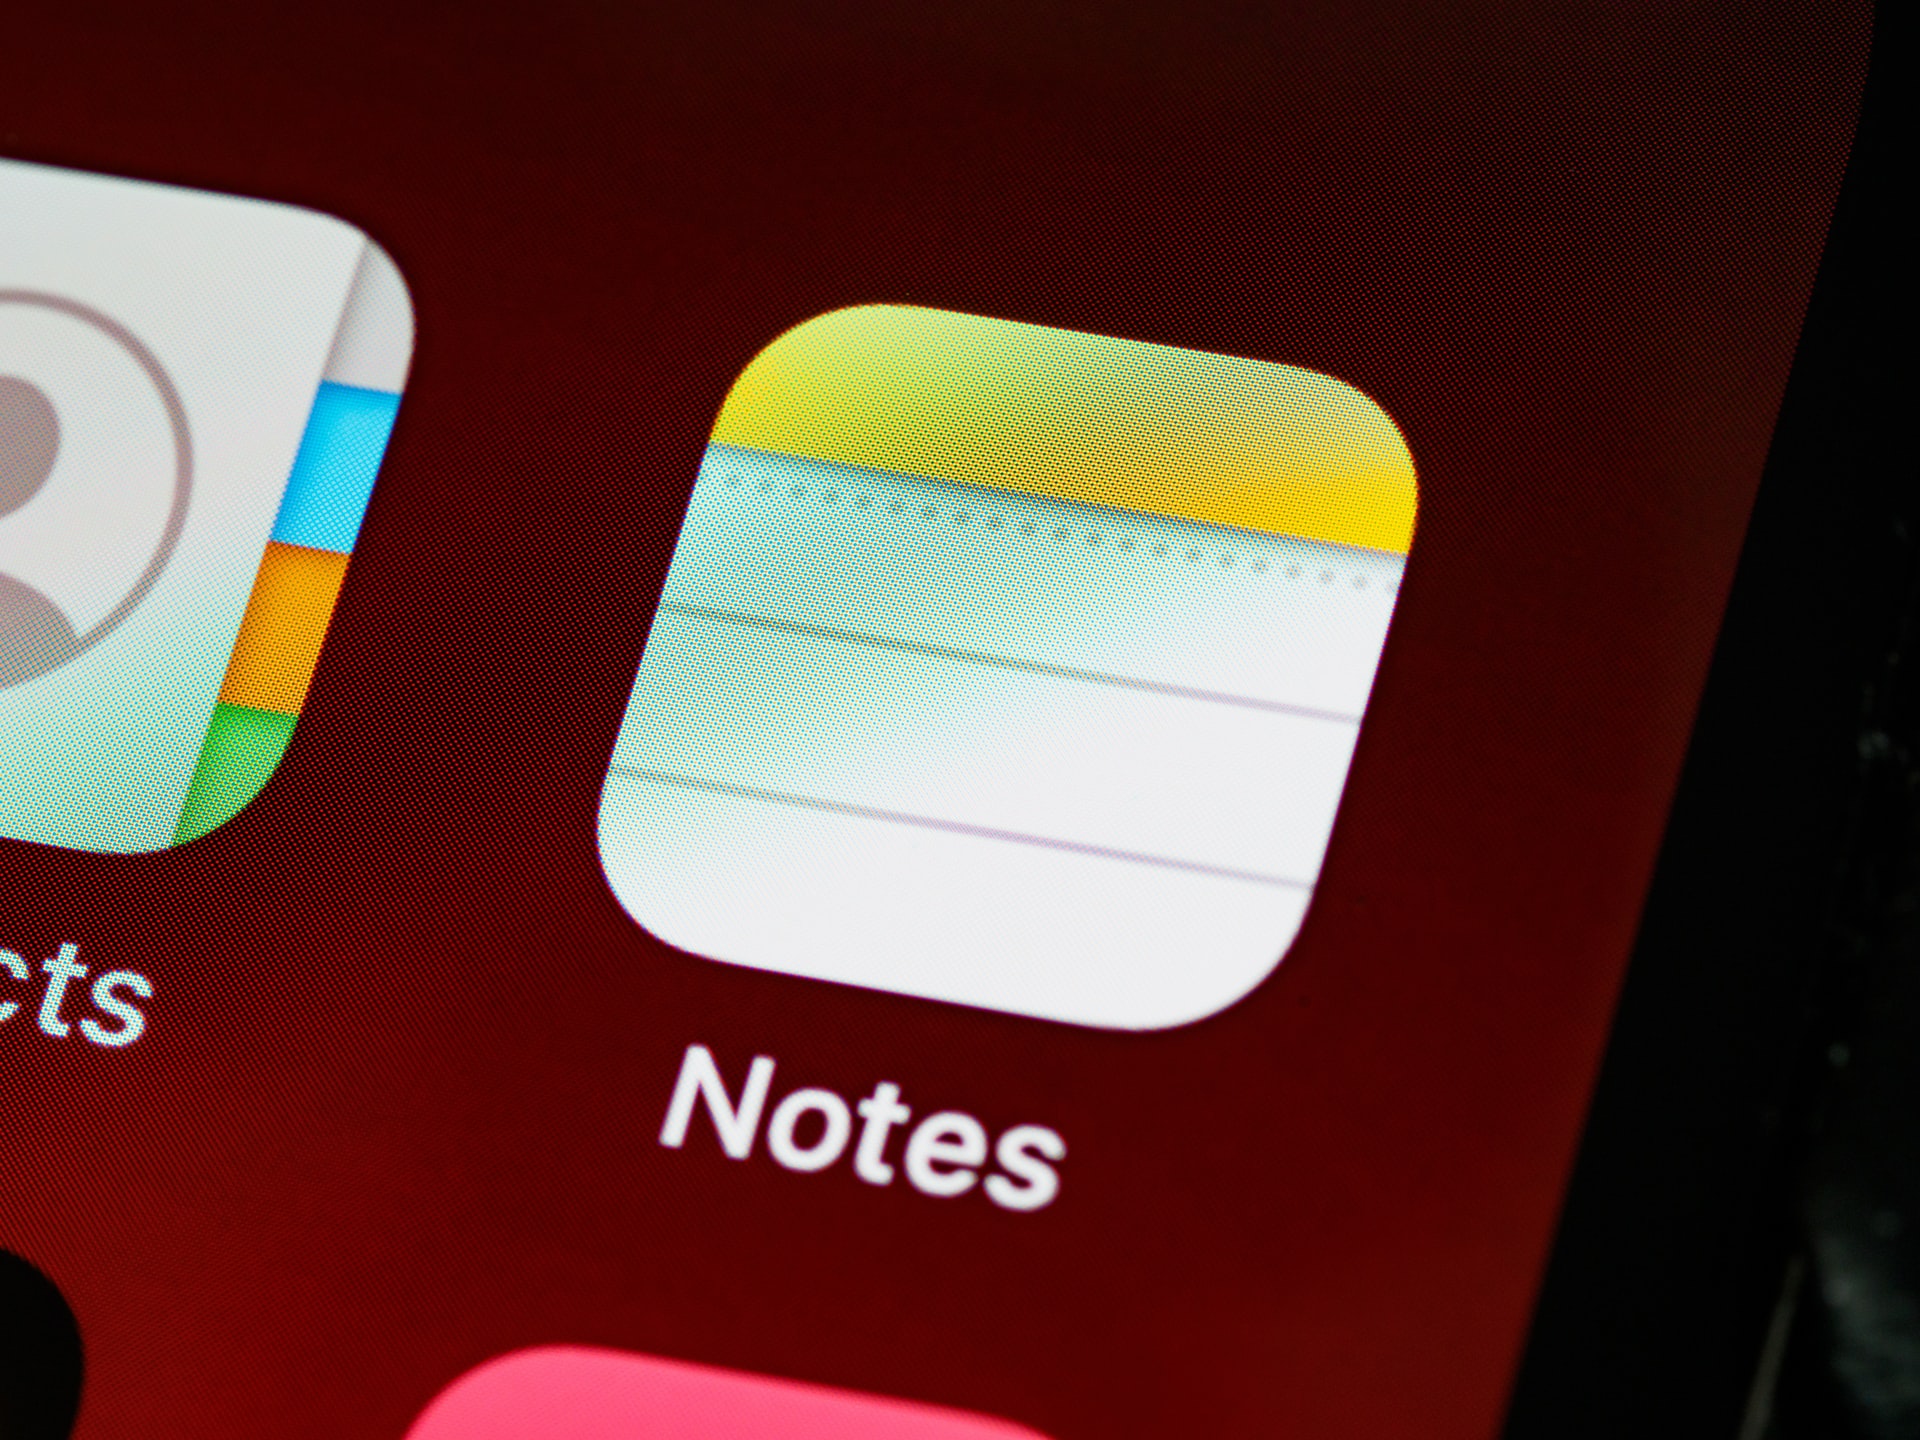 How to Undo a Note on iPhone